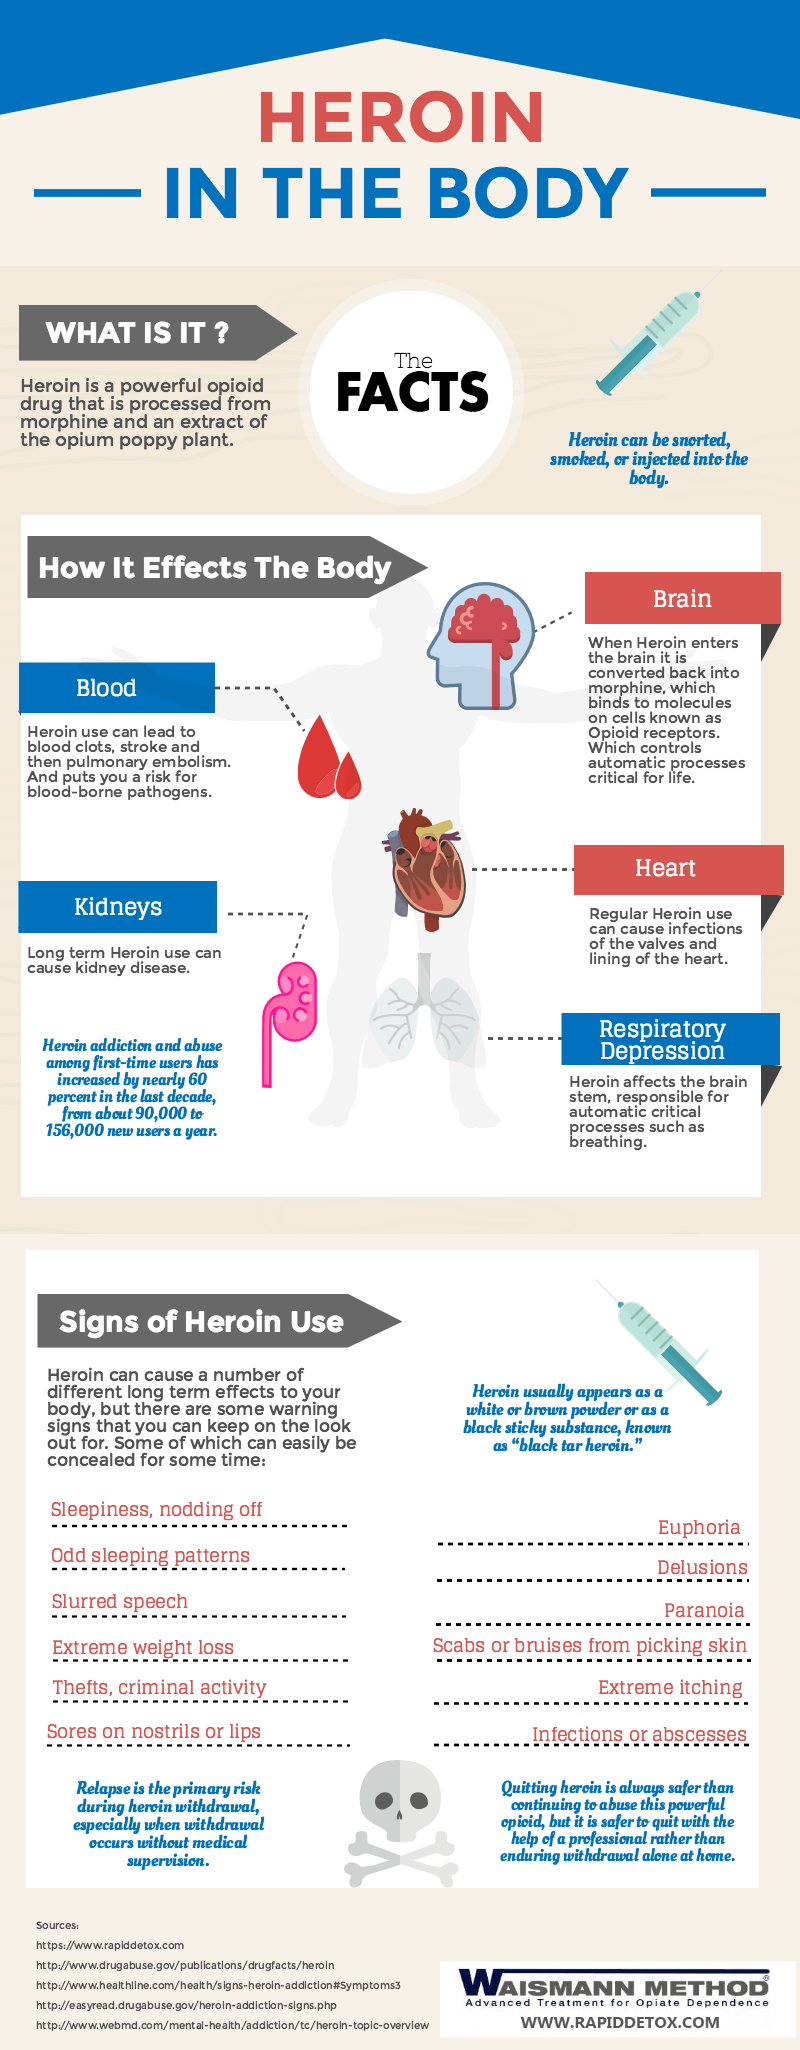 Rapid Detox - Heroin In The Body Infographic